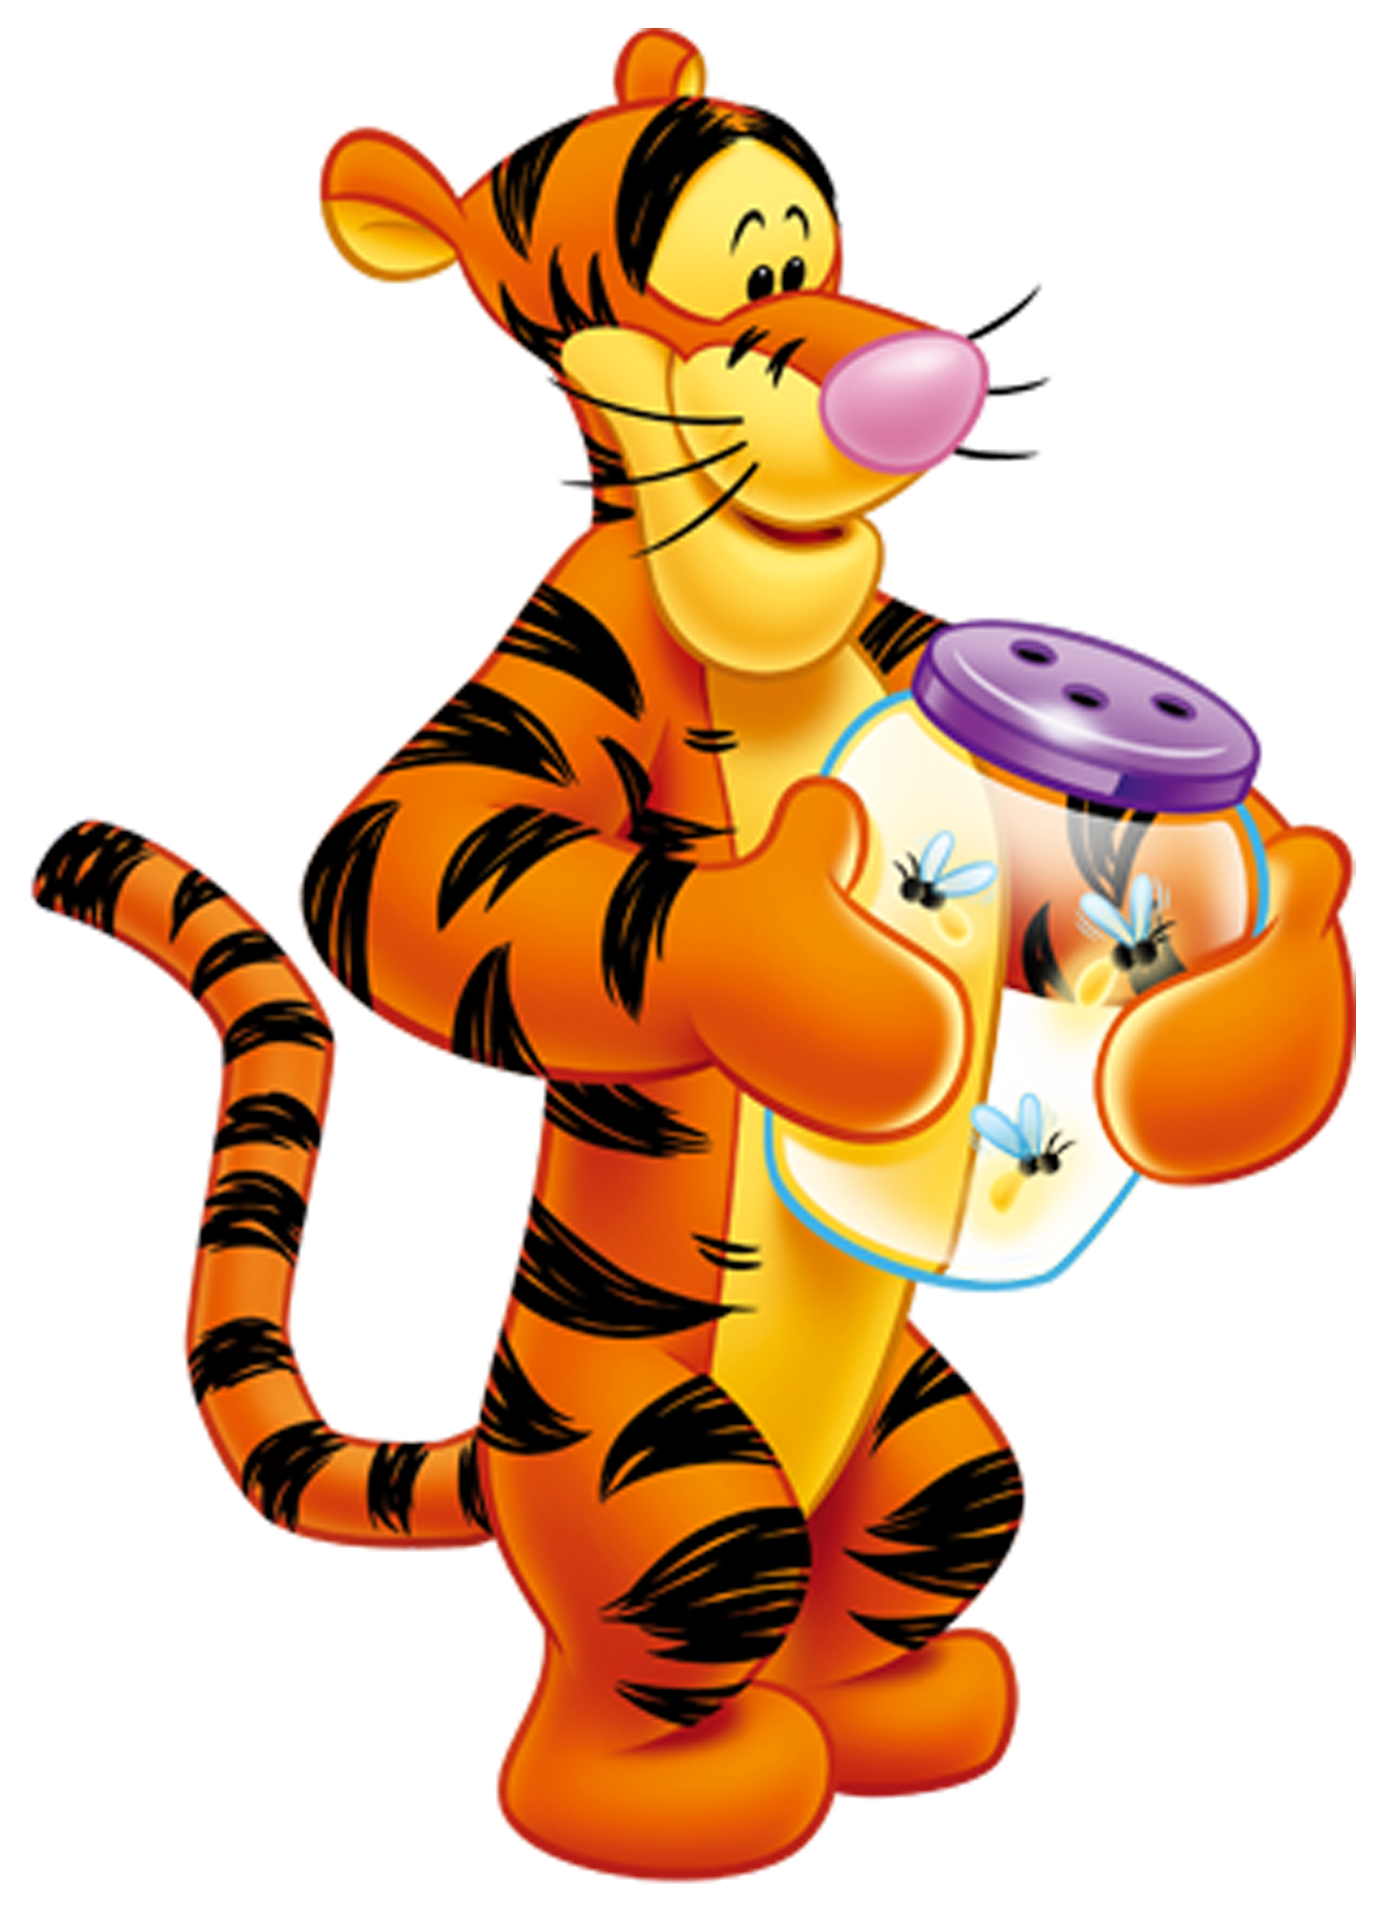 Winnie the Pooh PNG Transparent Images Free Download - Pngfre